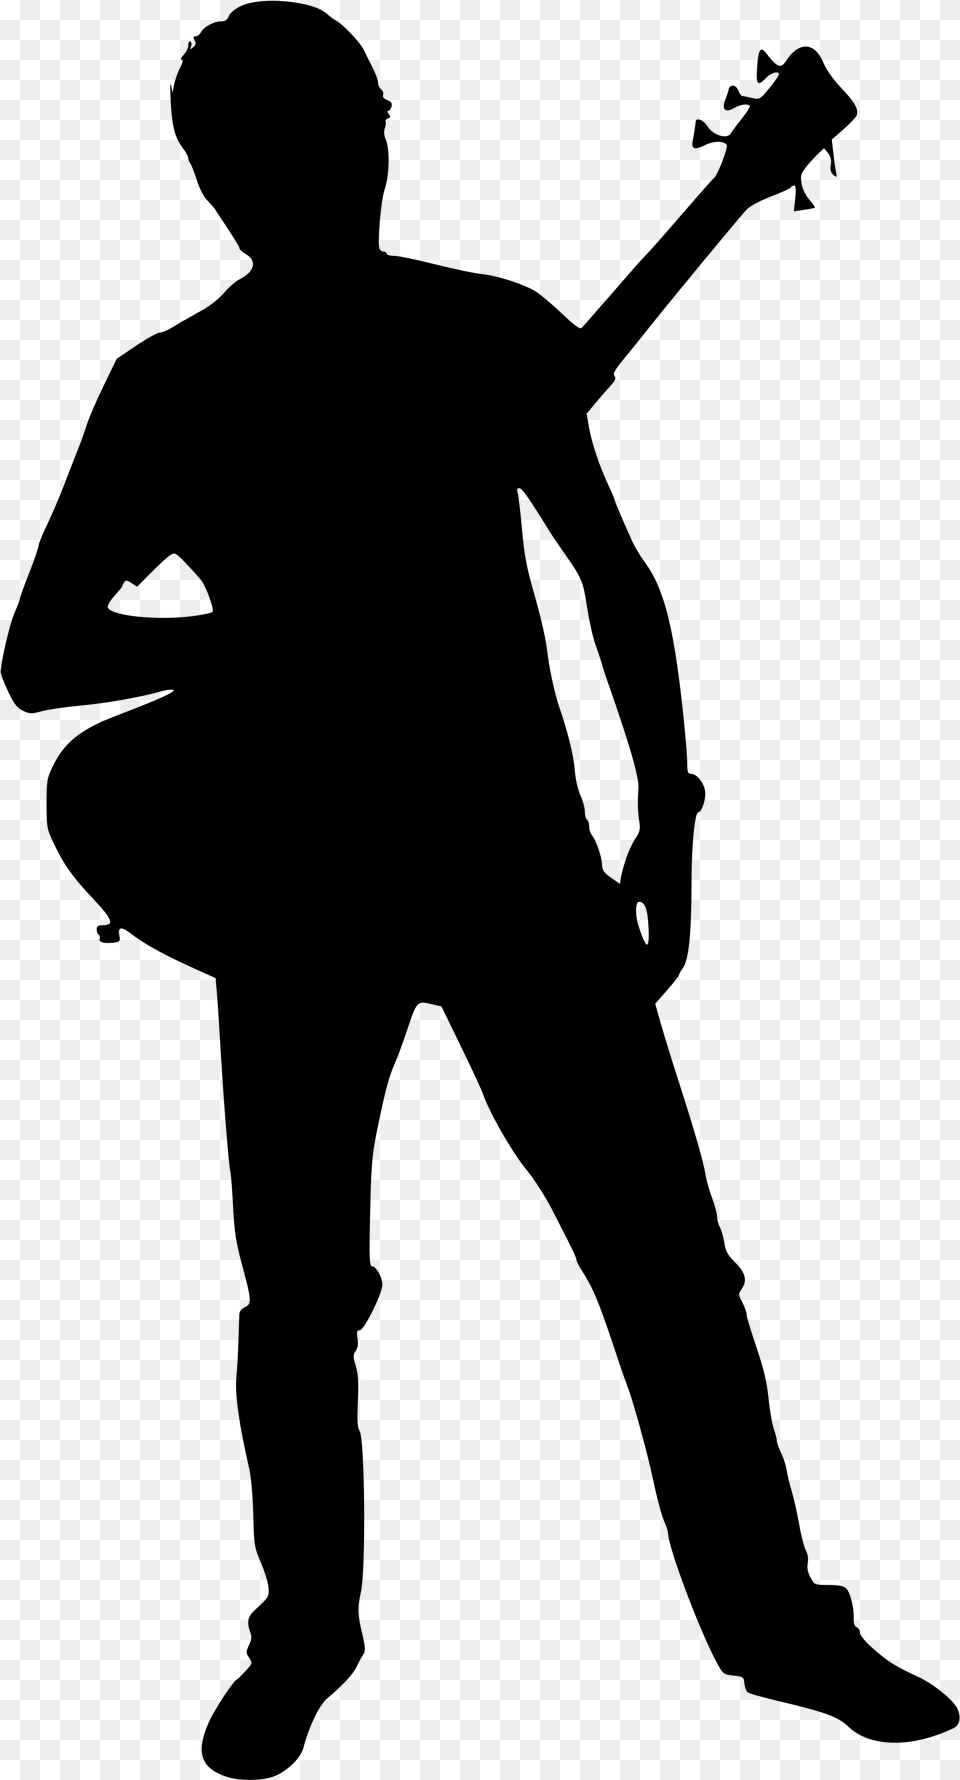 File Band Silhouette 06 Svg Wikimedia Commons Kidz Rock, Gray Free Transparent Png